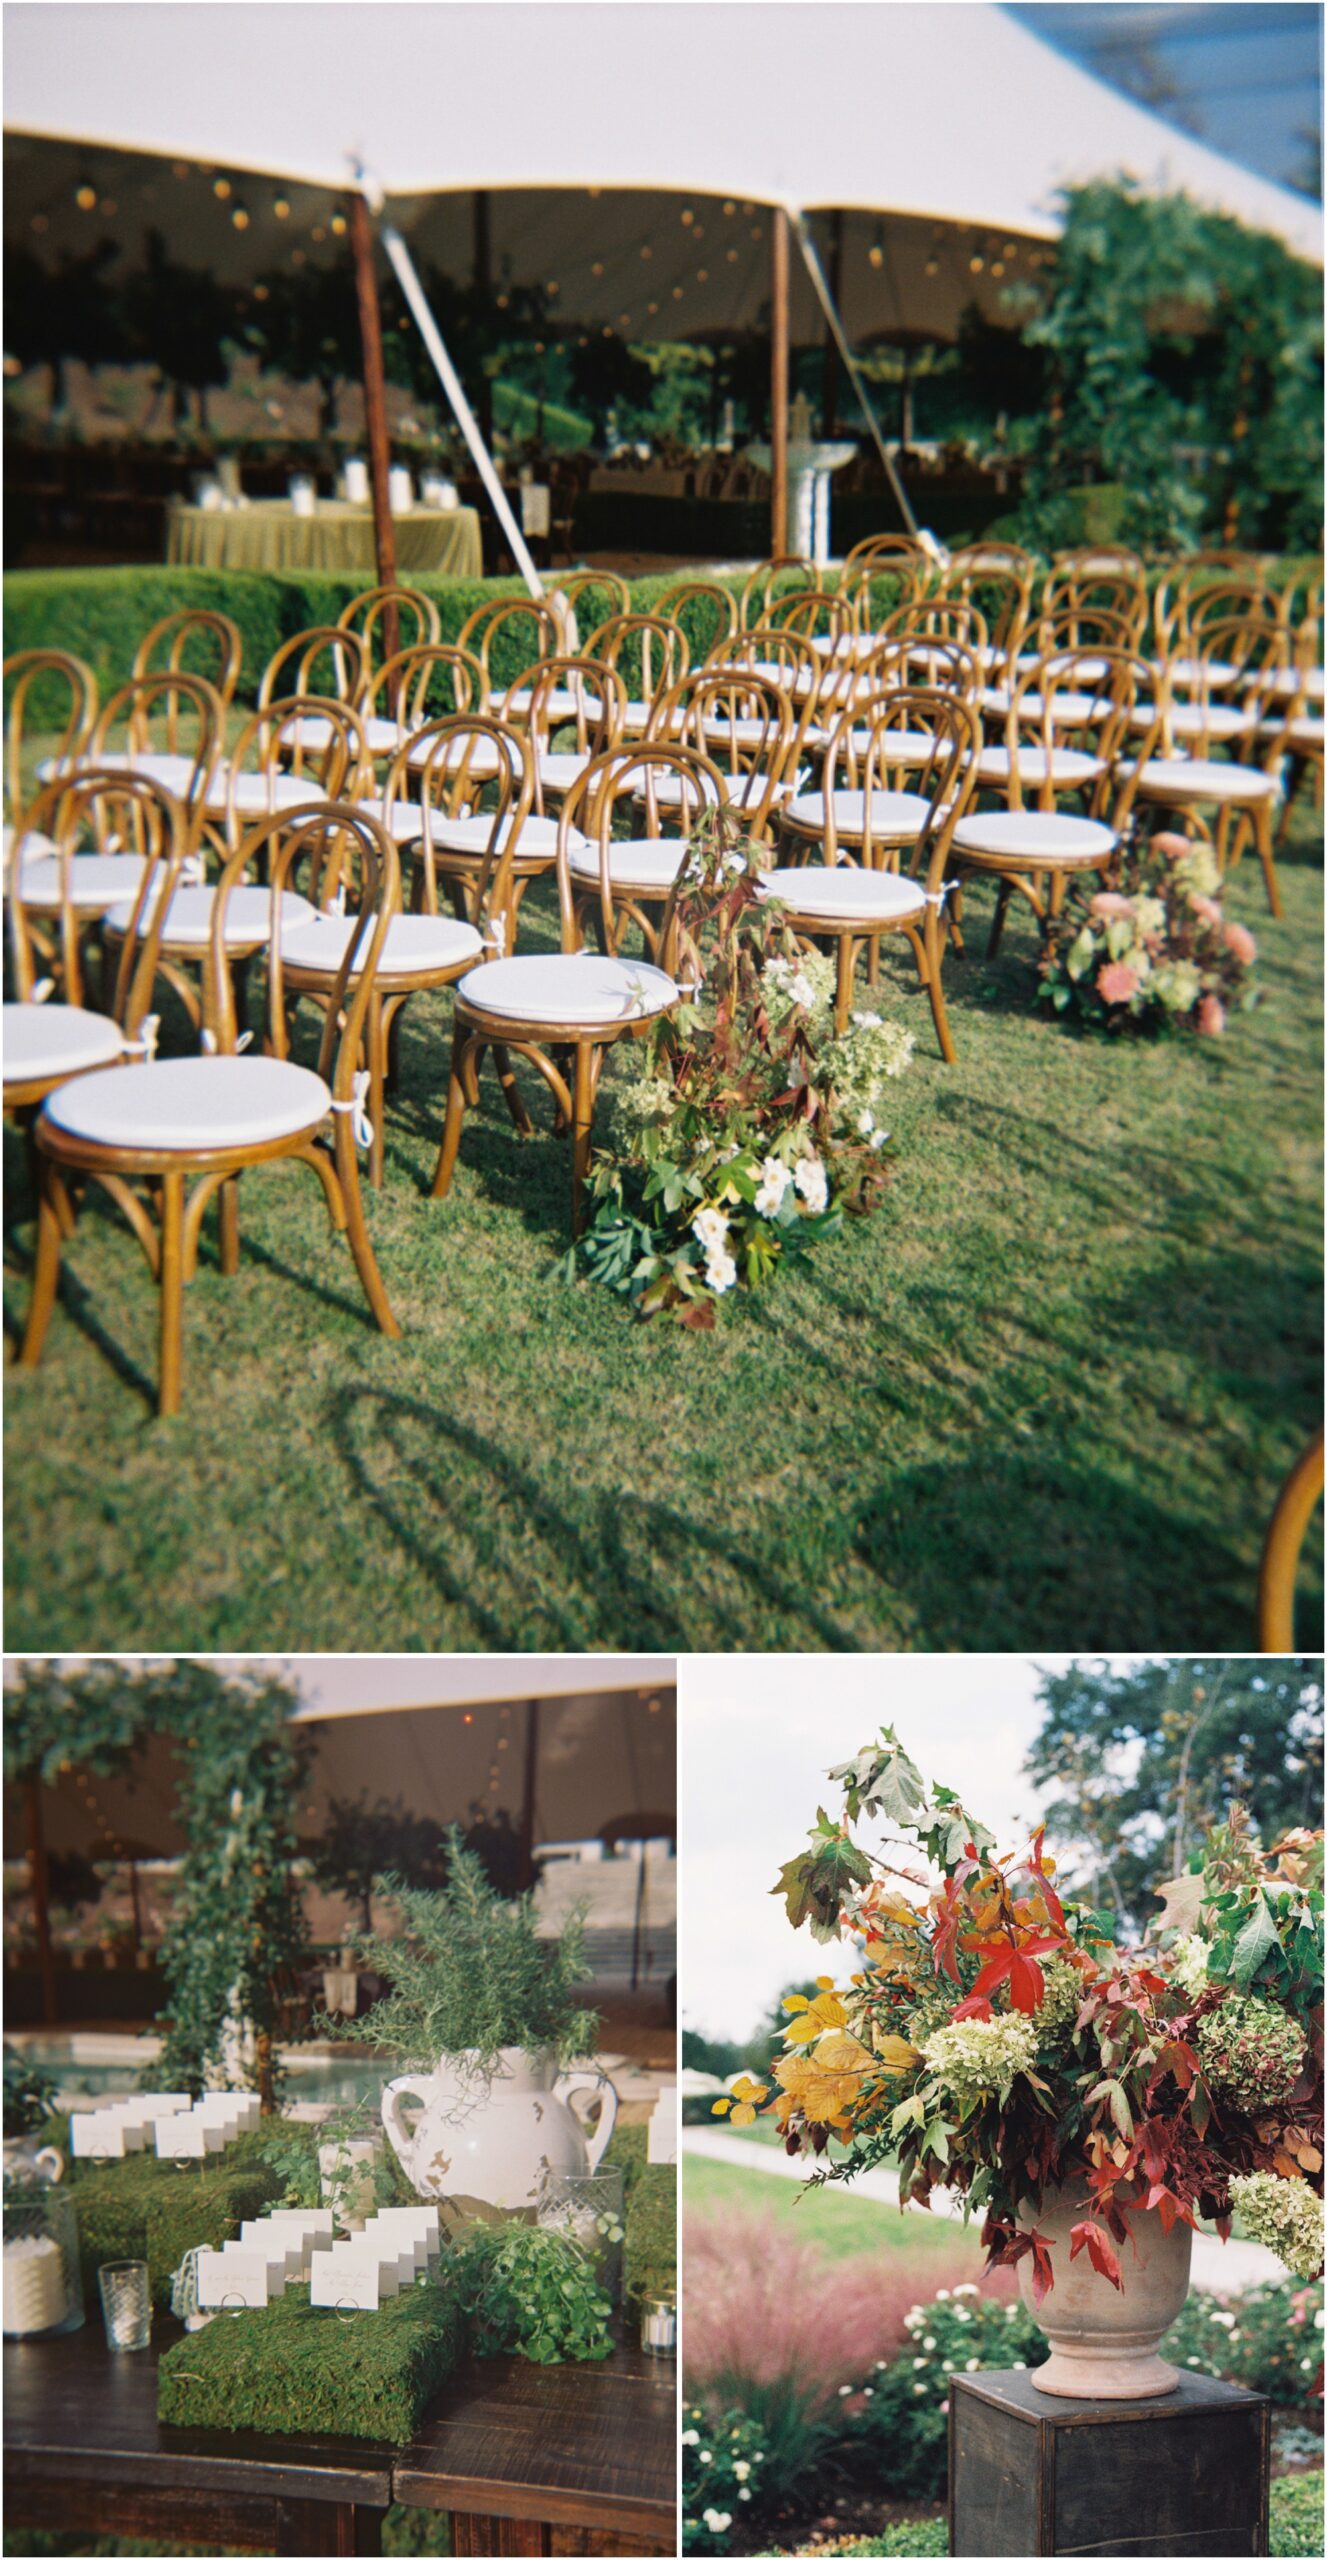 wedding ceremony documented on 120mm film at a wedding at commodore perry estate in austin texas